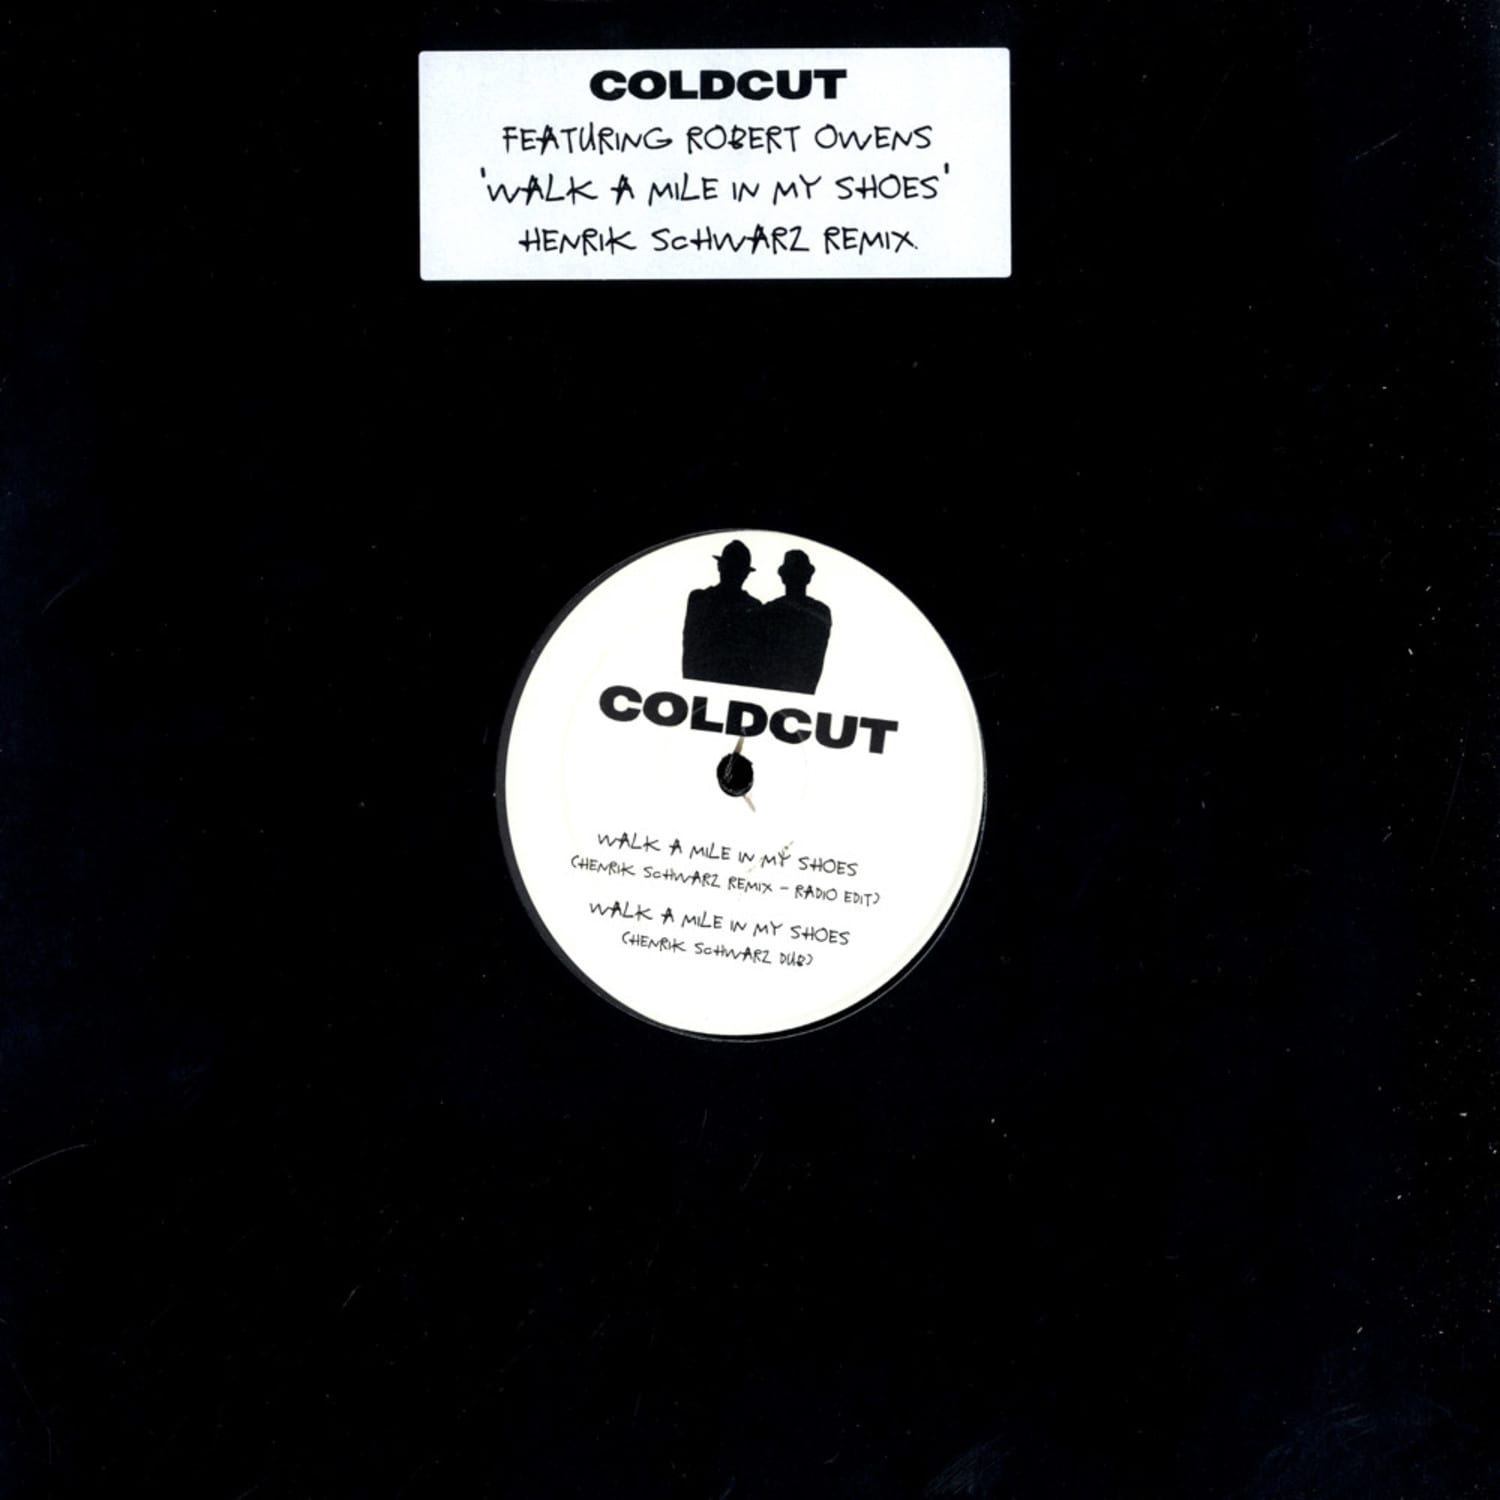 Coldcut - WALK A MILE IN MY SHOES